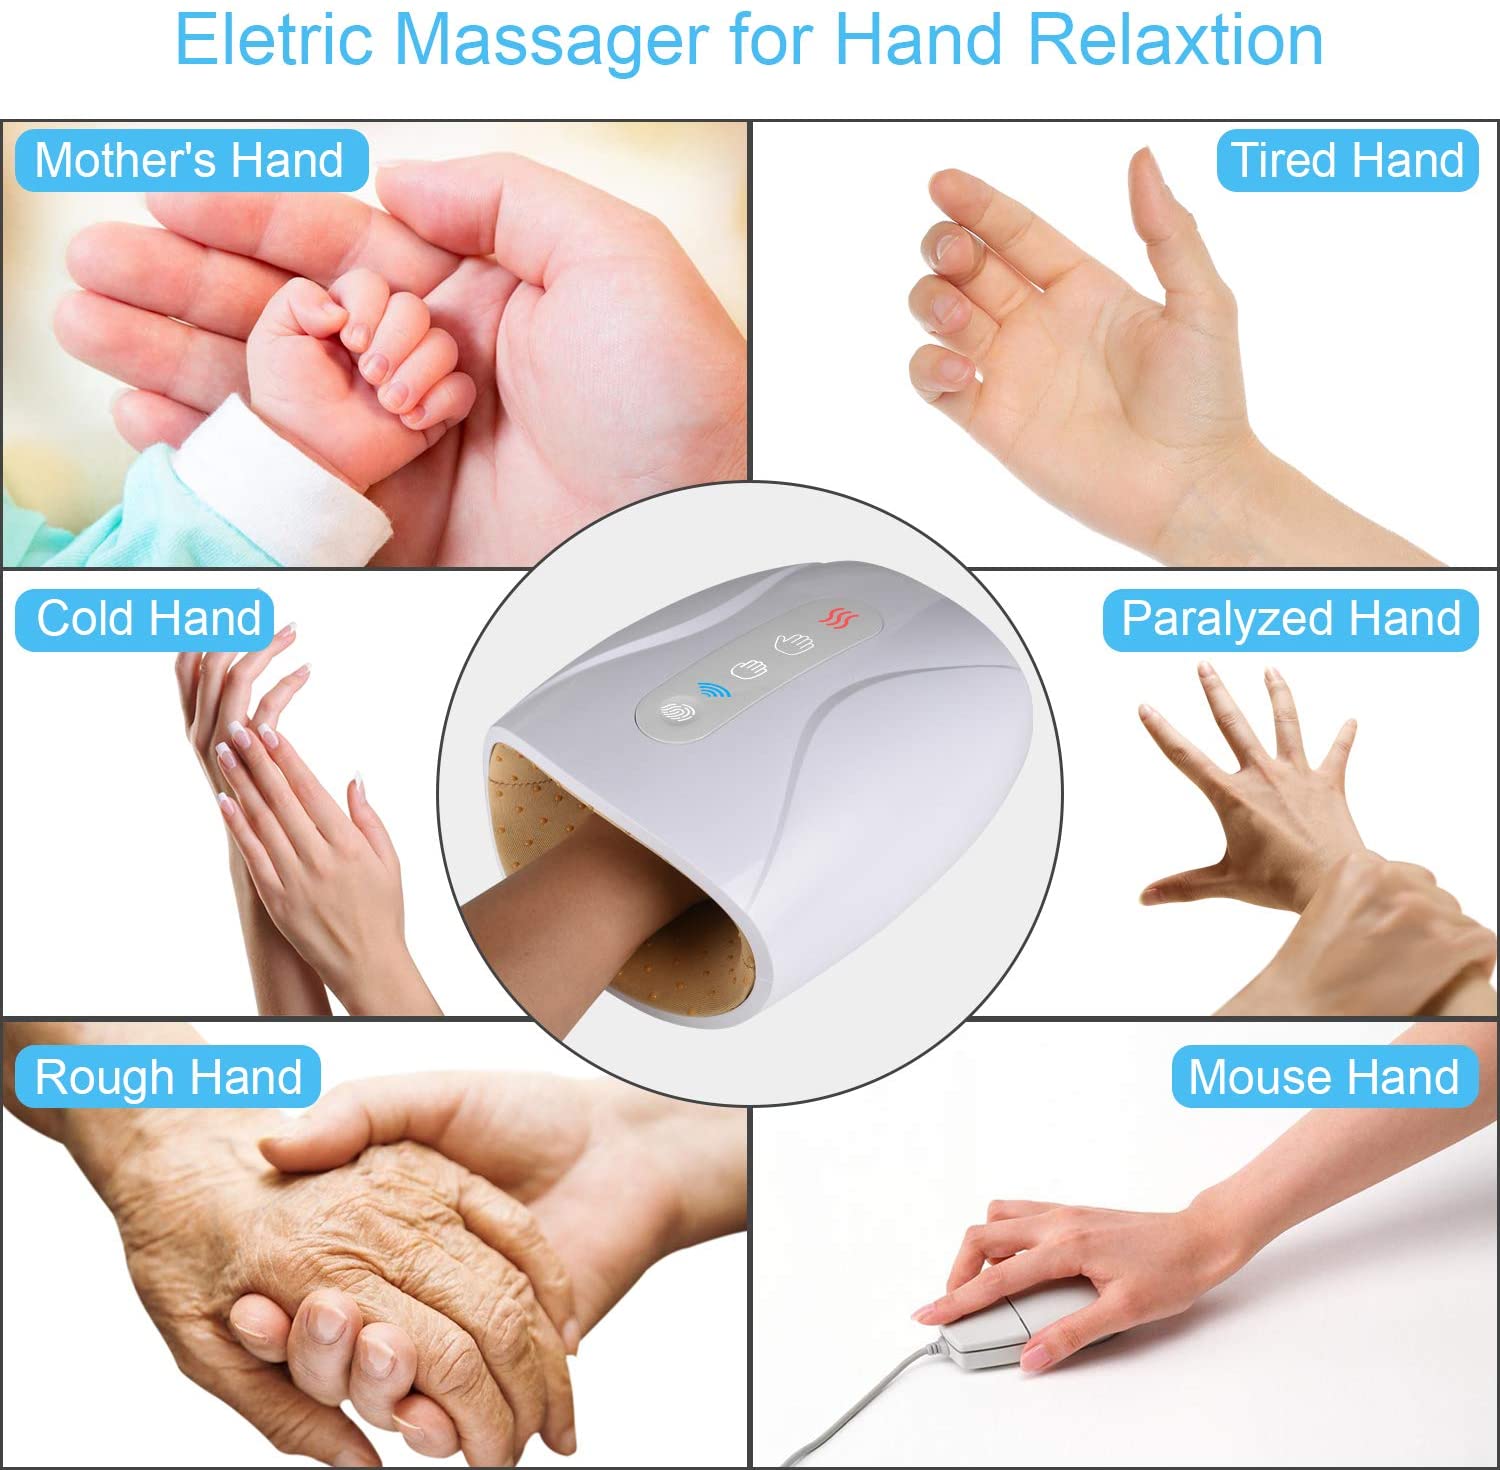 Electric Hand Massager for Palm Massage, Cordless Accupressure Massager Compress/Heat/Rechargeable for Arthritis